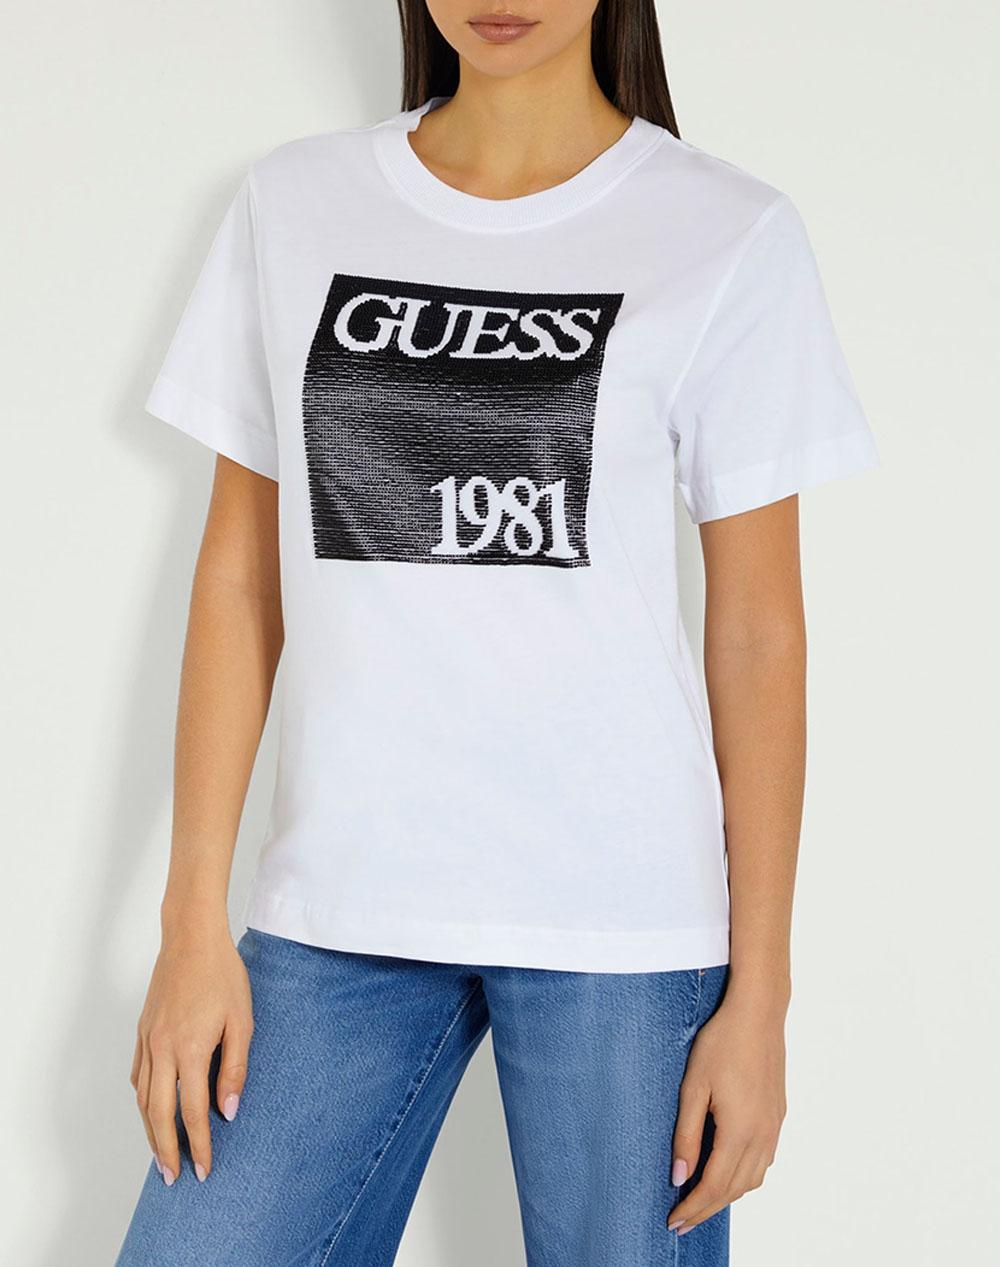 GUESS SS CN GUESS BEADS TEE ΜΠΛΟΥΖΑ ΓΥΝΑΙΚΕΙΟ W4GI16I3Z14-G011 White 3810AGUES3400392_XR05646